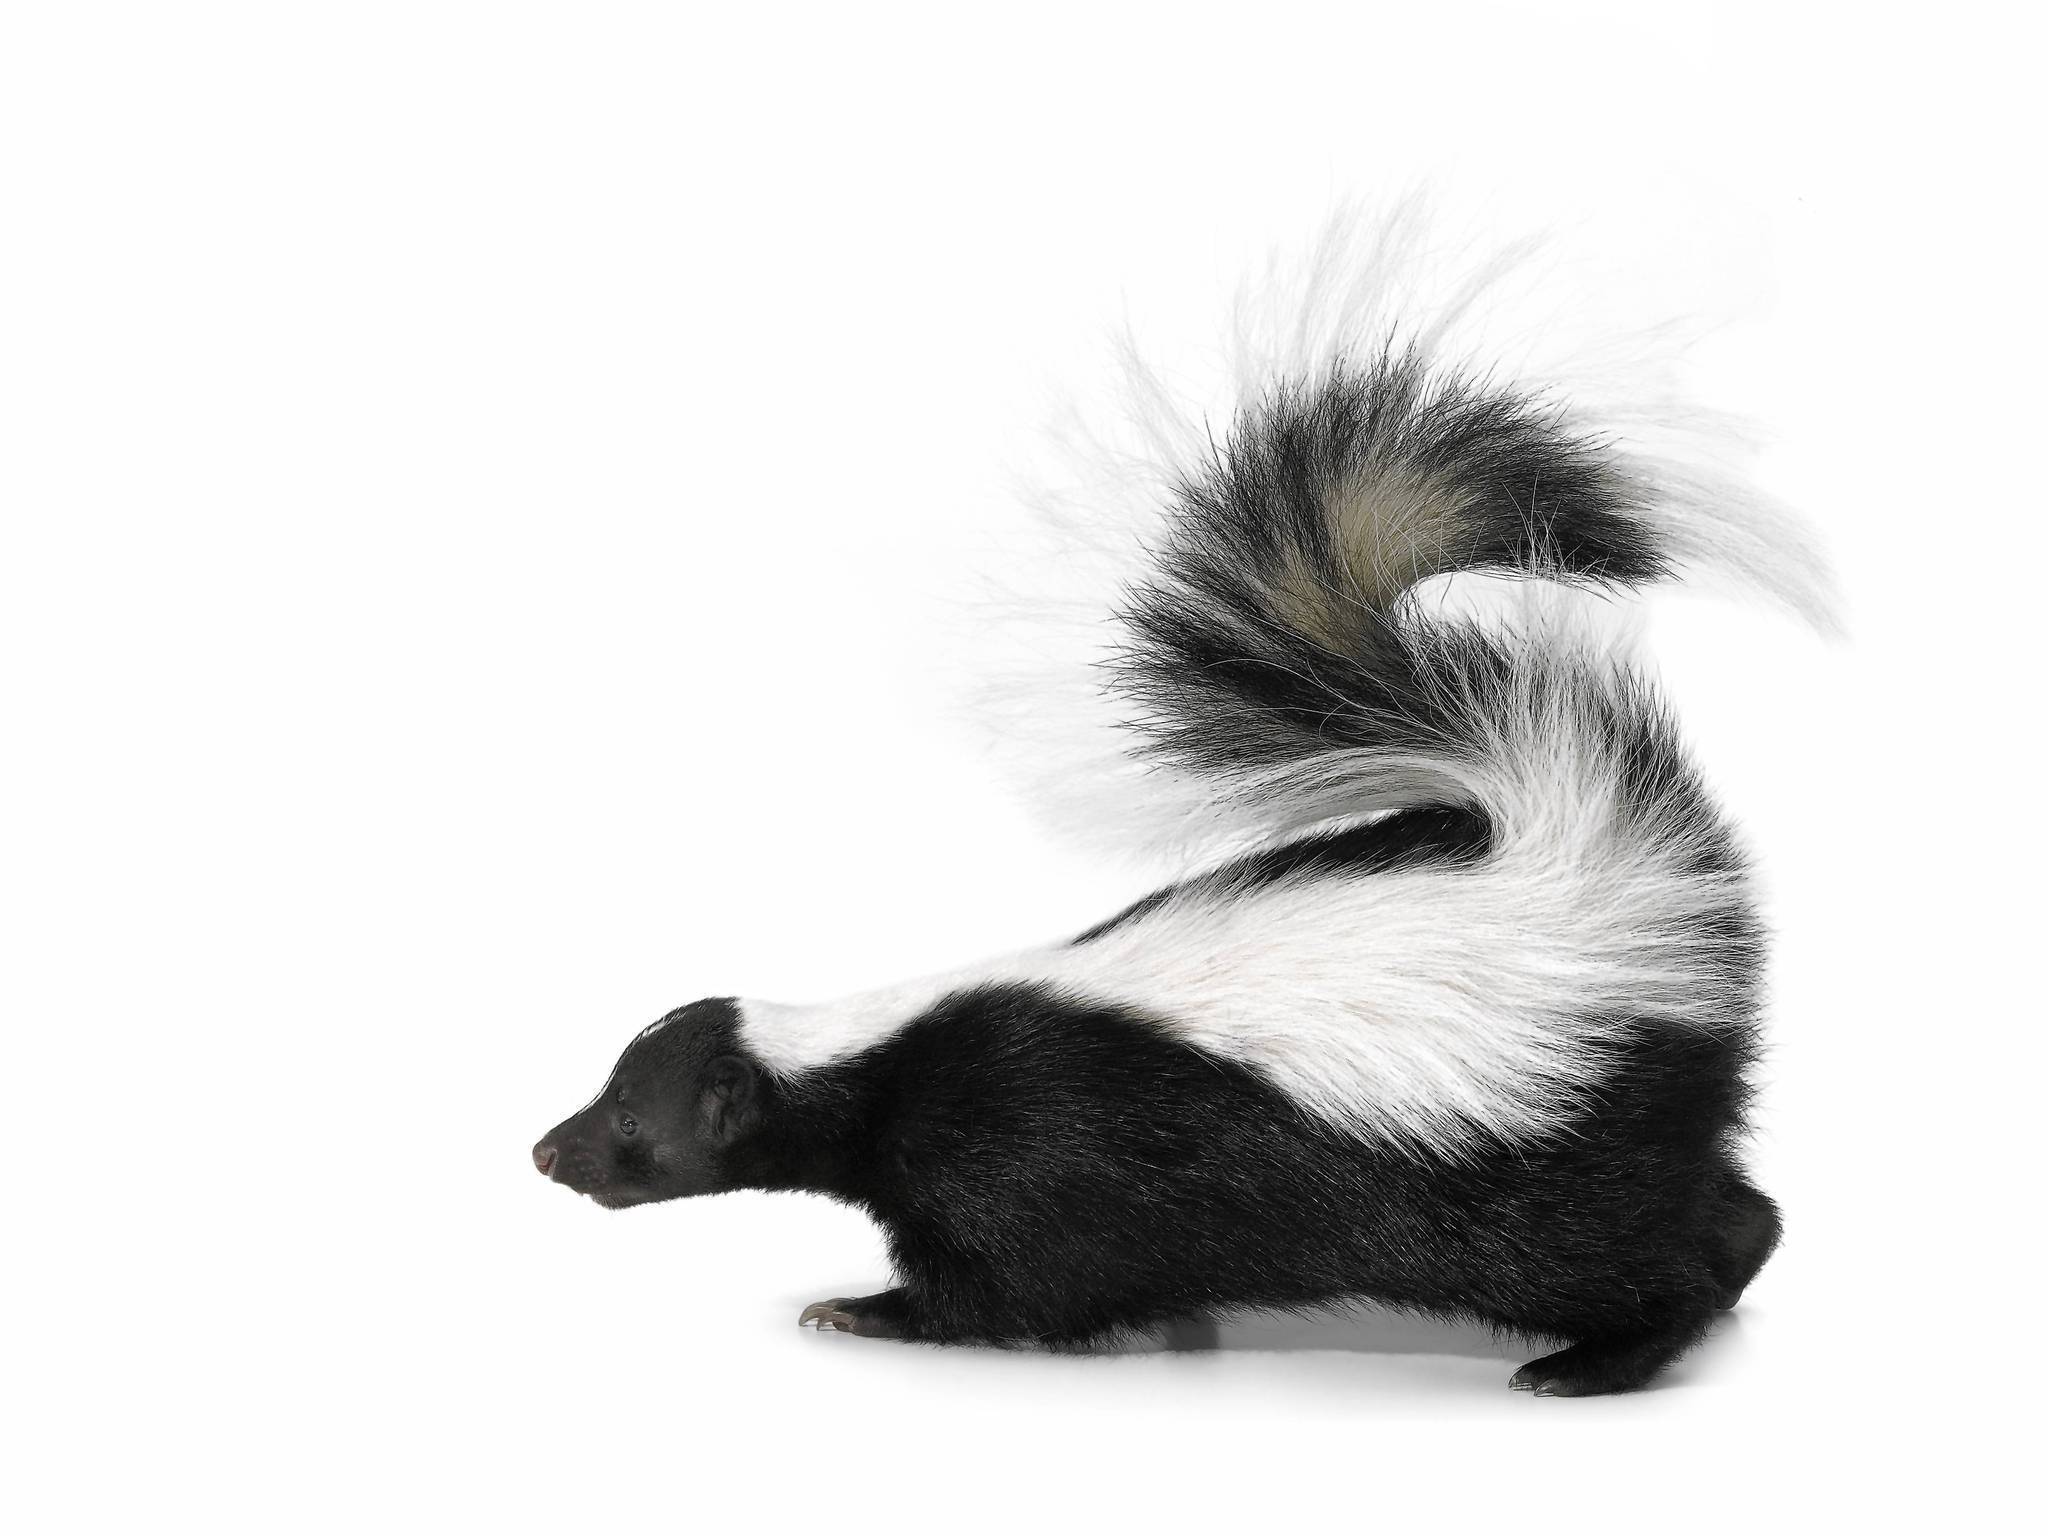 How Long Does Skunk Smell Last?